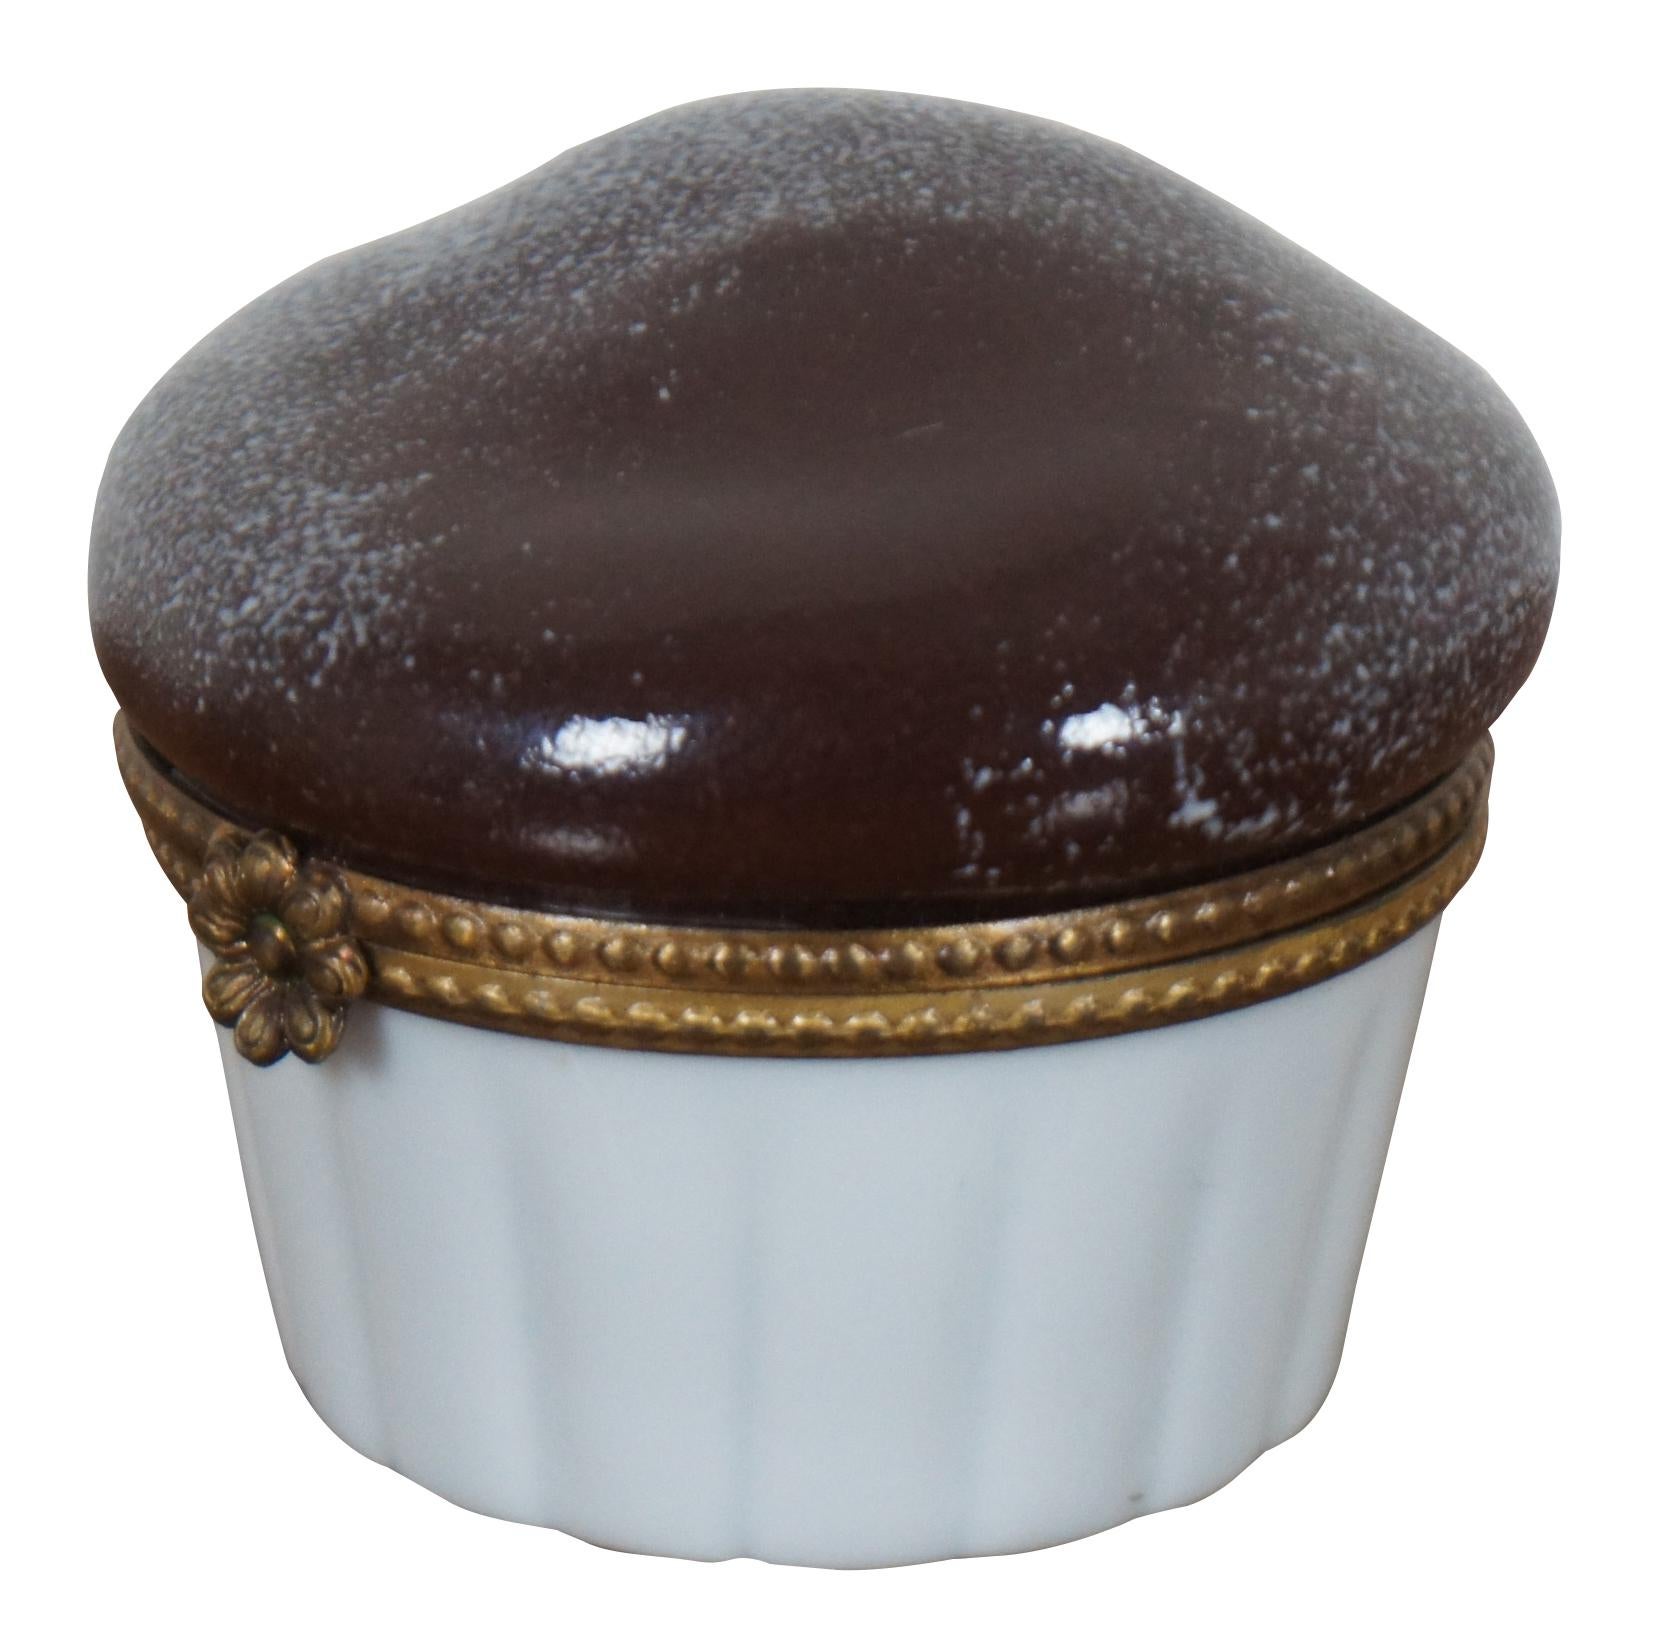 Vintage Peint Main Eximious Limoges France porcelain trinket box in the shape of a chocolate souffle or cupcake in white paper with a chocolate iced top sprinkled with powered sugar. Measure: 2